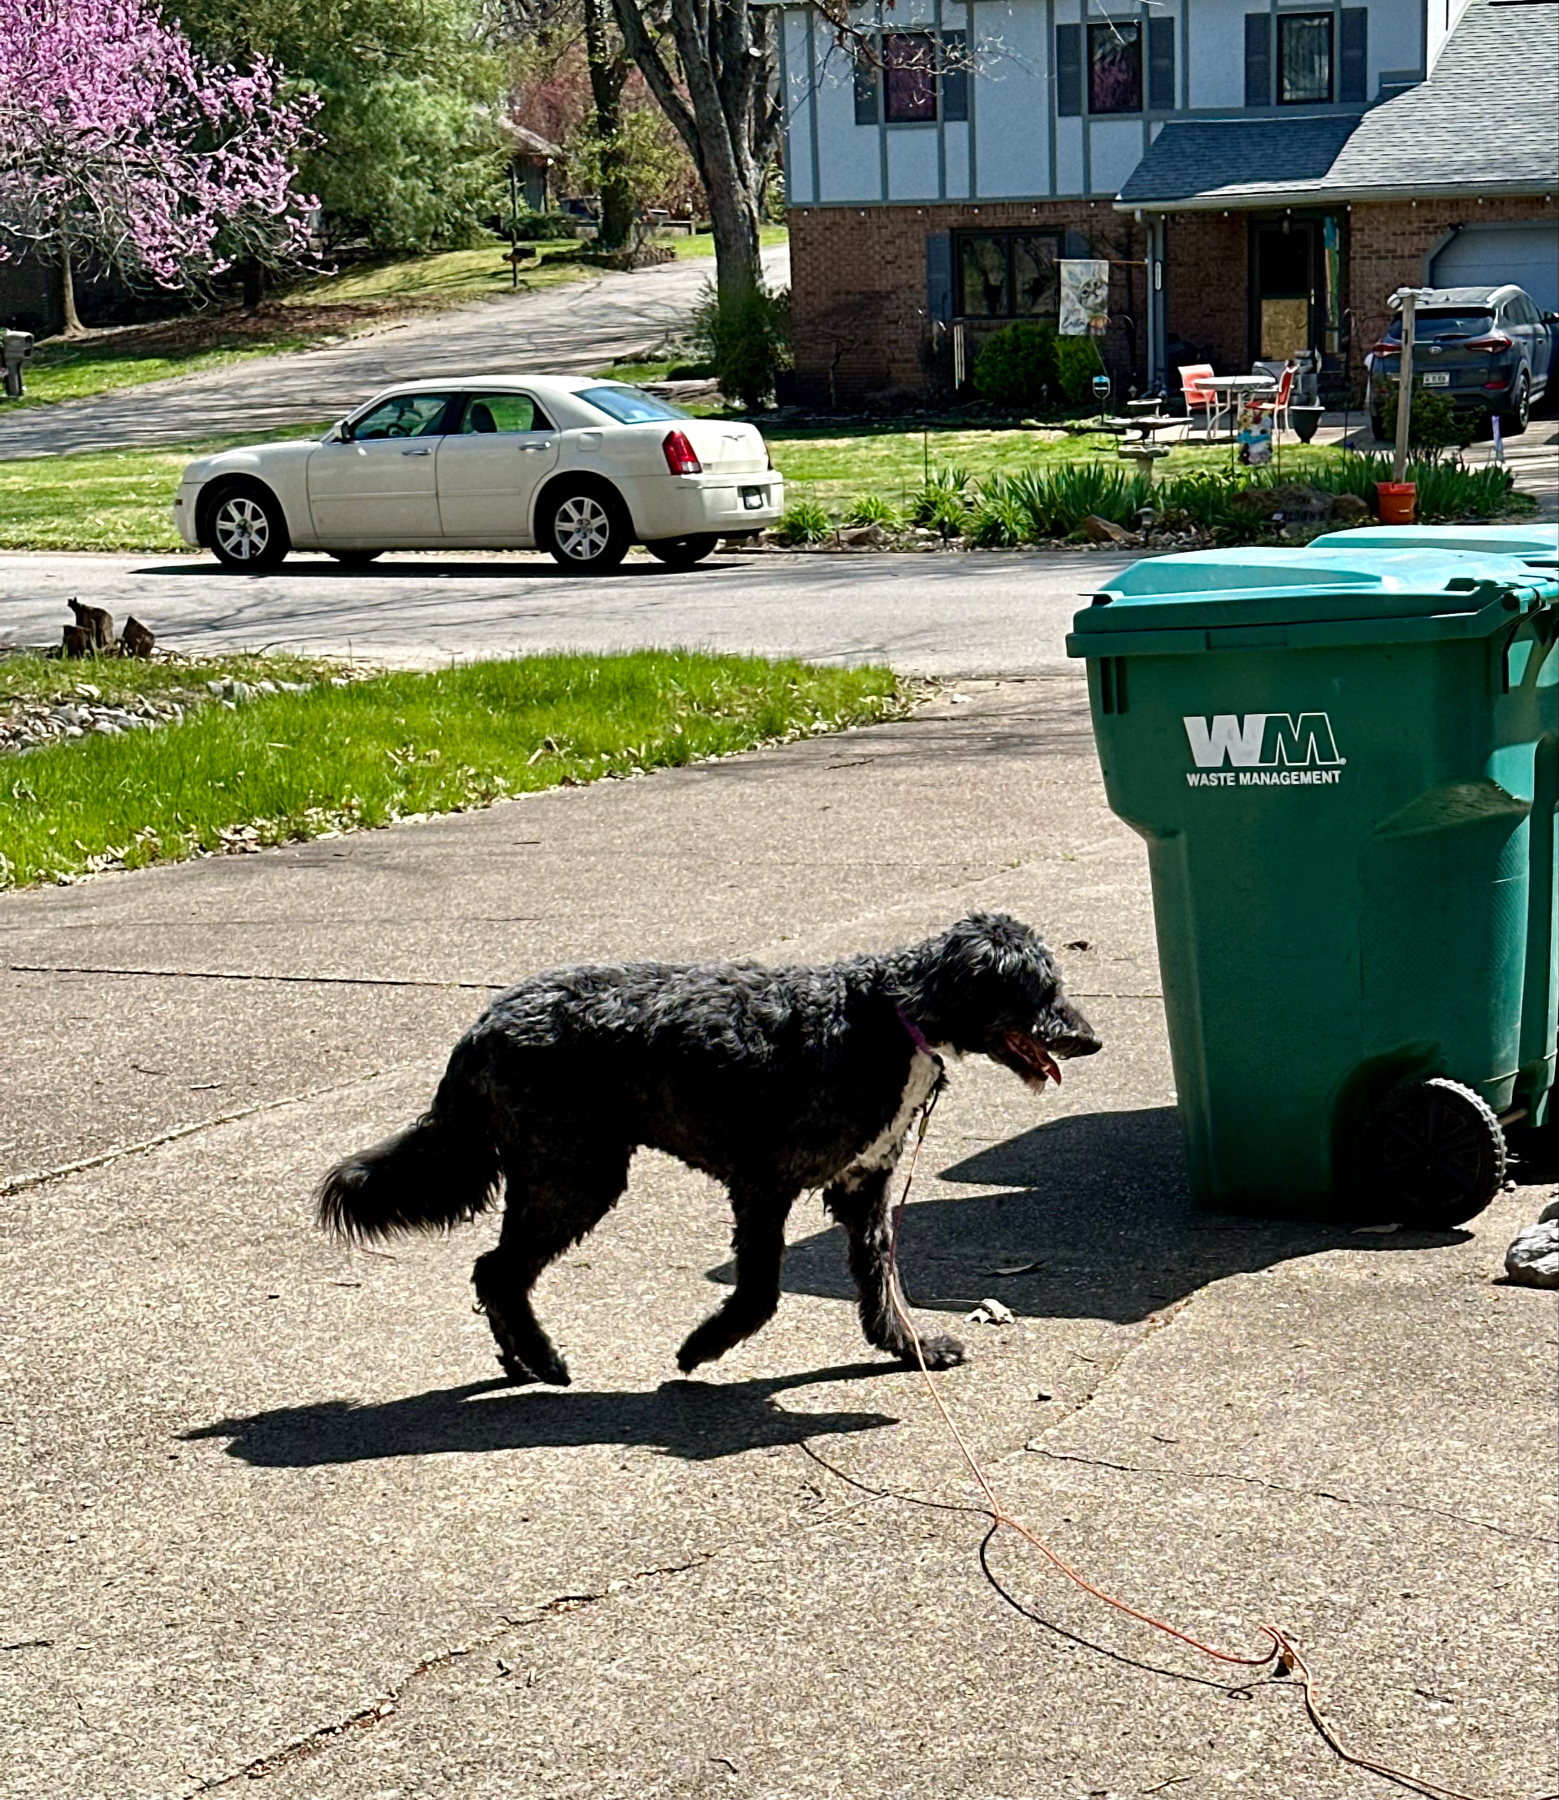 A black dog on a leash walking past a green waste management bin on a sunny residential driveway with a white sedan and houses in the background.